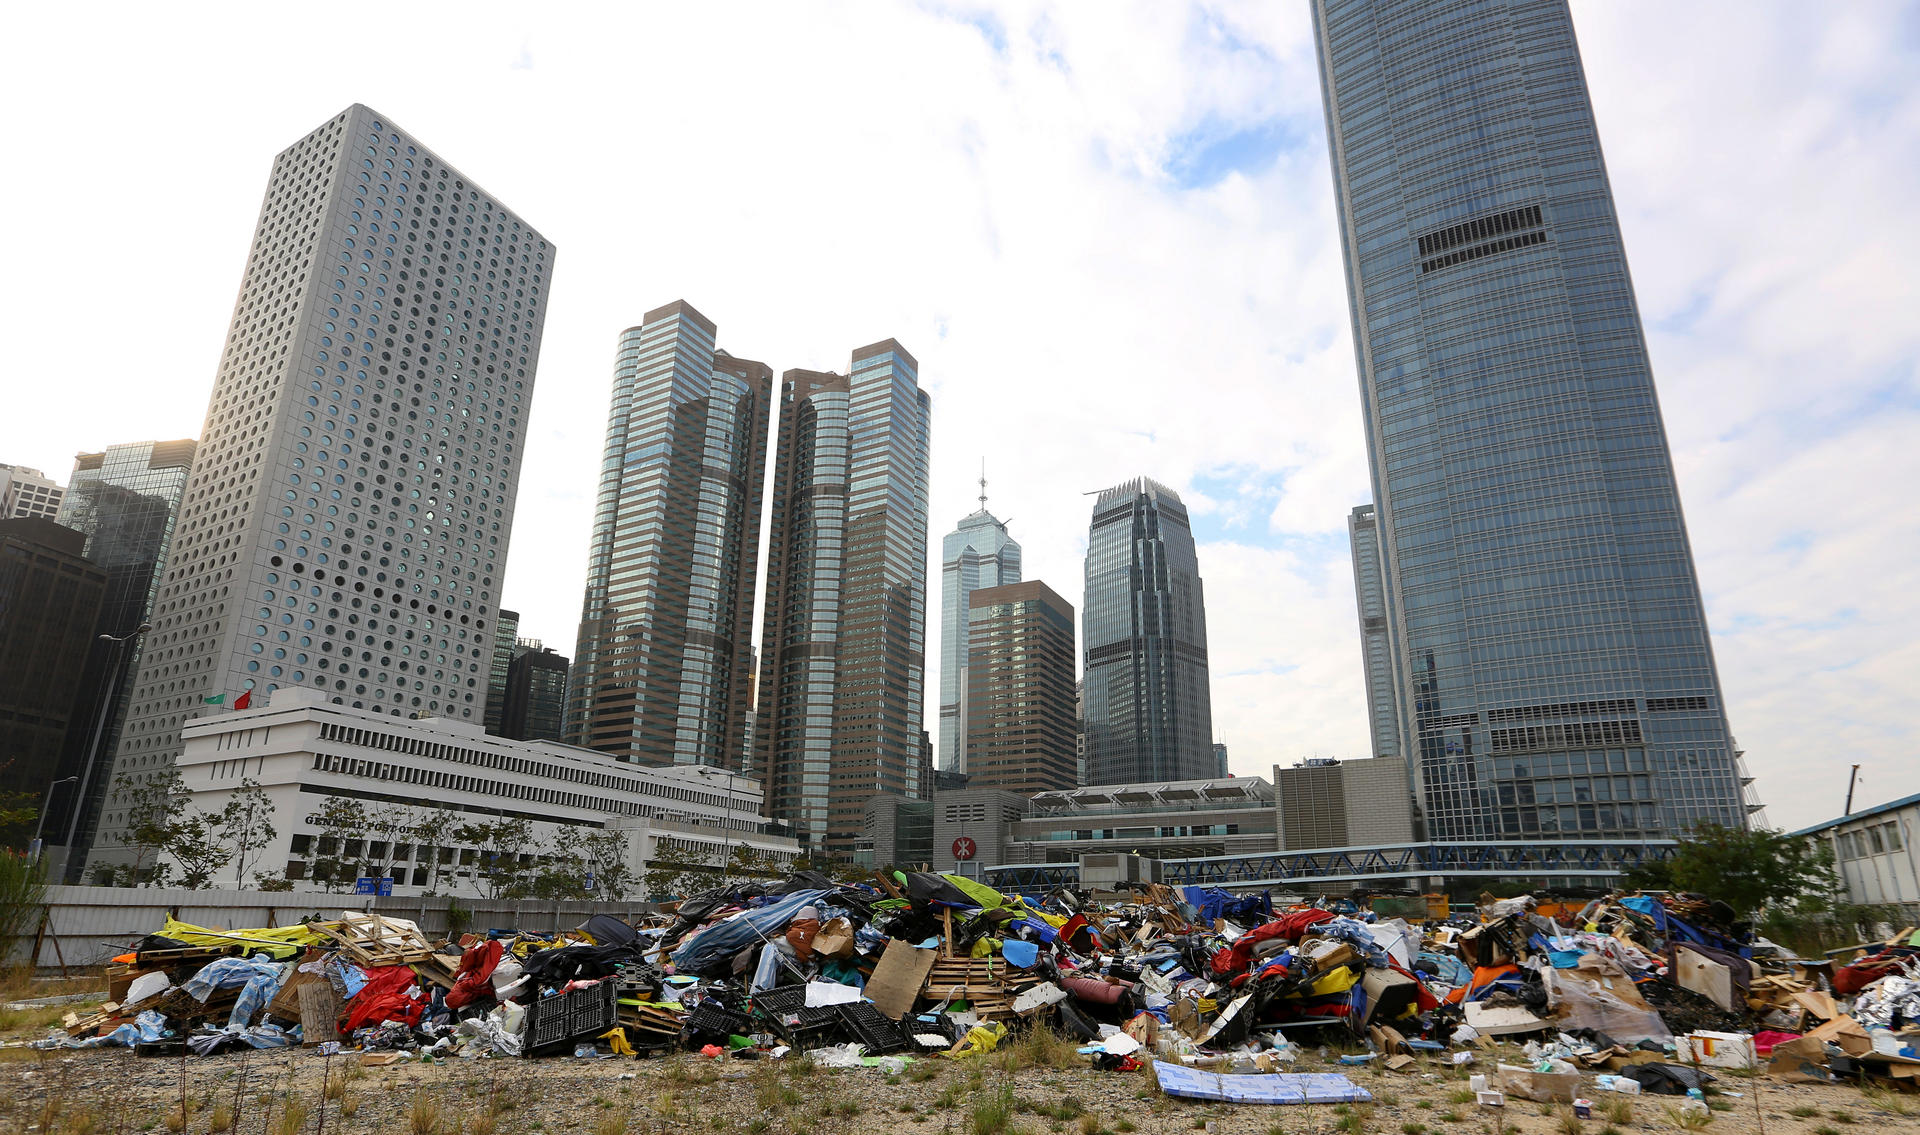 Tents, barricades and supplies from the Admiralty Occupy site lie dumped in a plot of land on the Central harbourfront yesterday, a day after the clearance. Photo: Edmond So